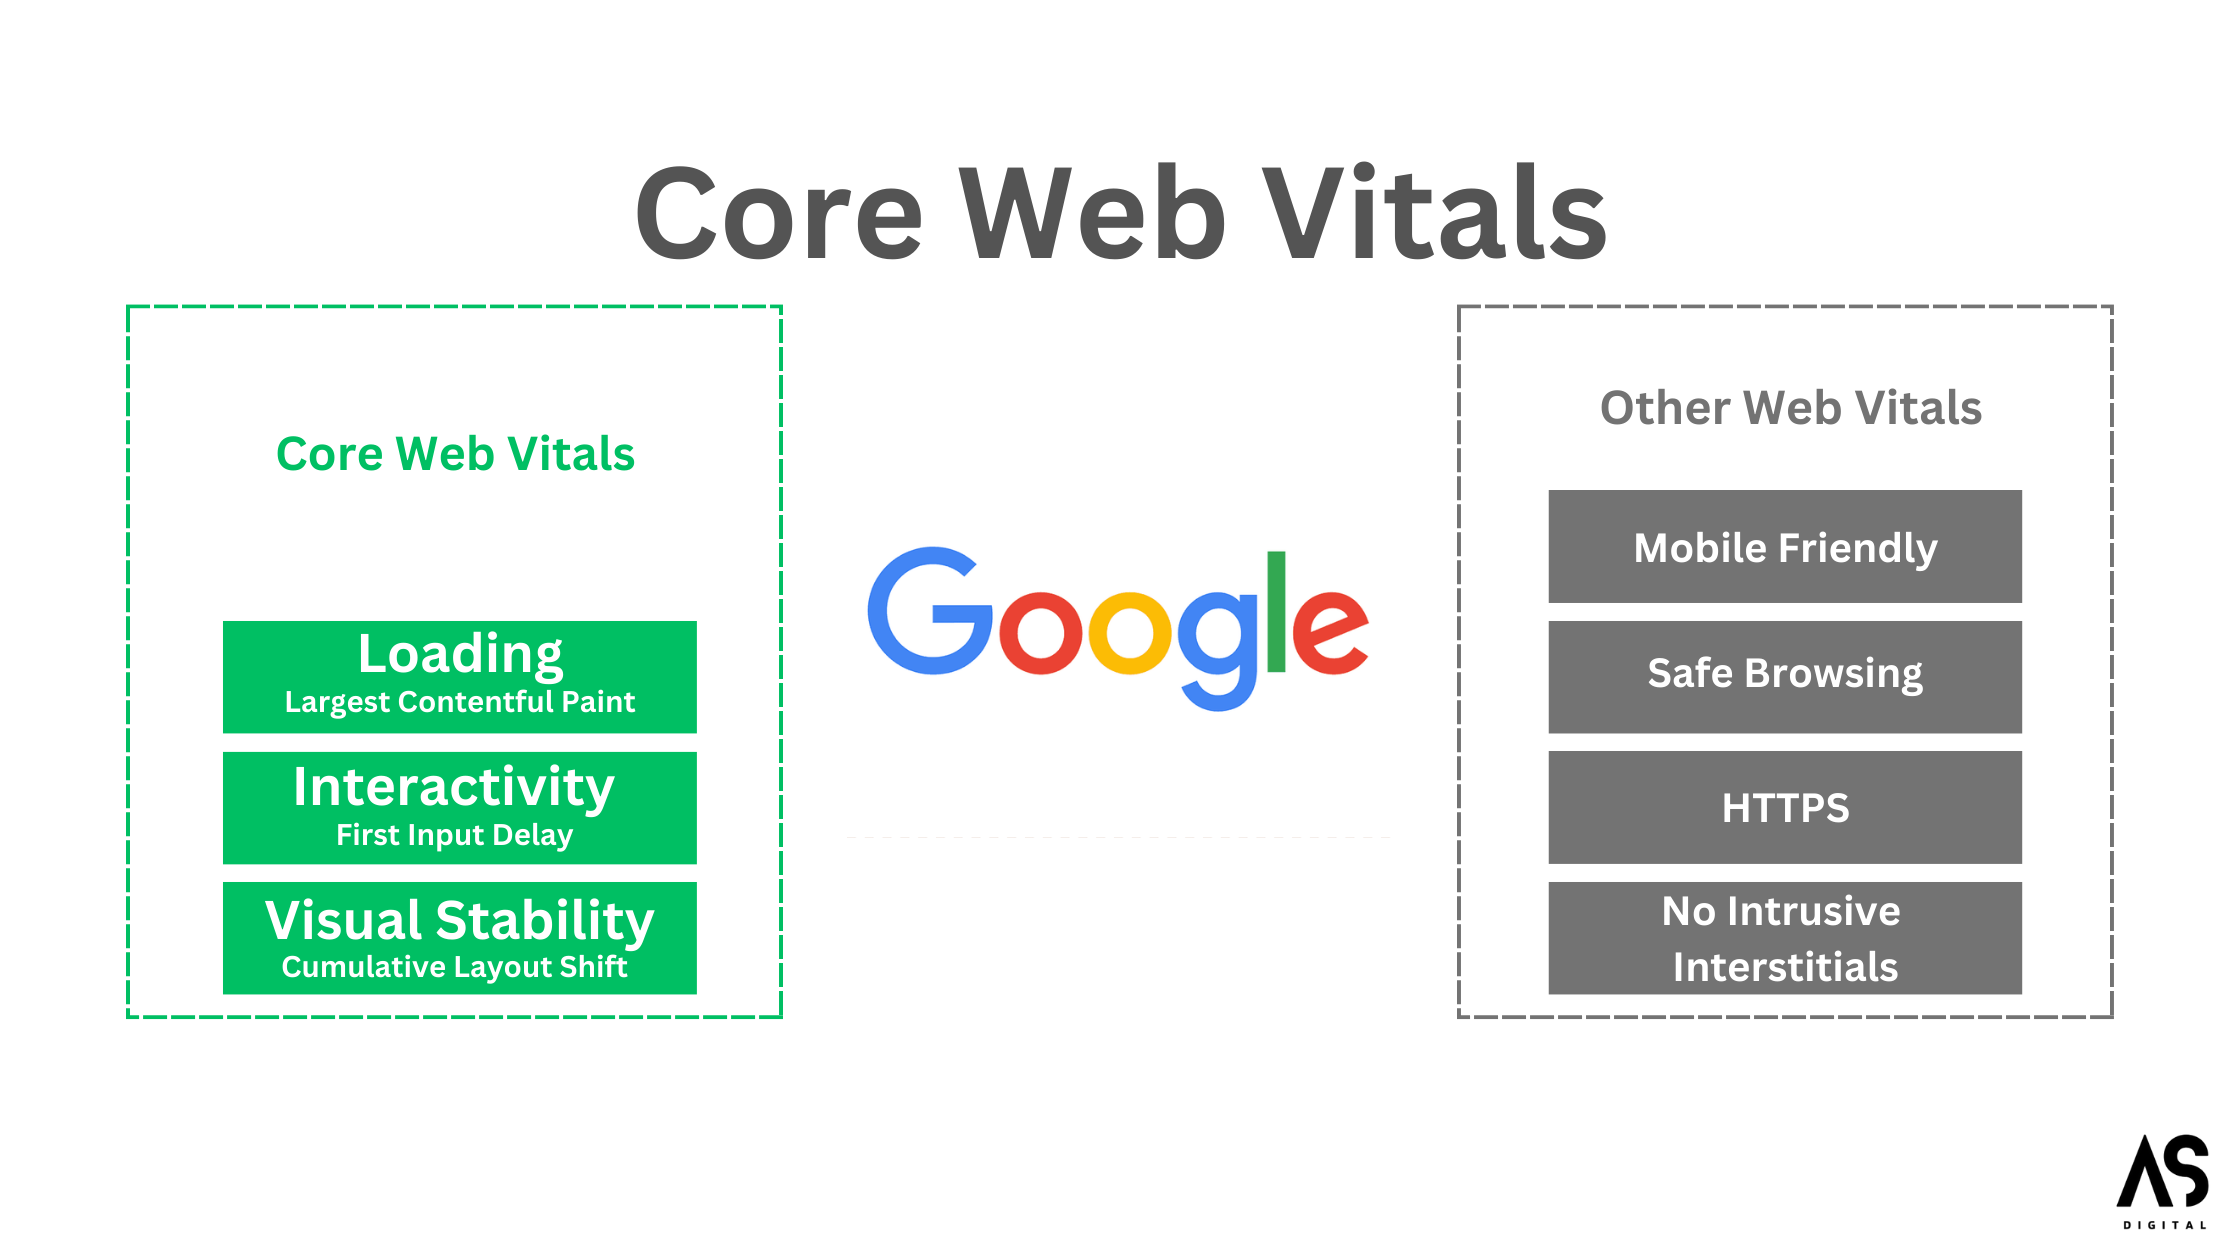 What Are Google Core Web Vitals Metrics? Why Are CWV Important?